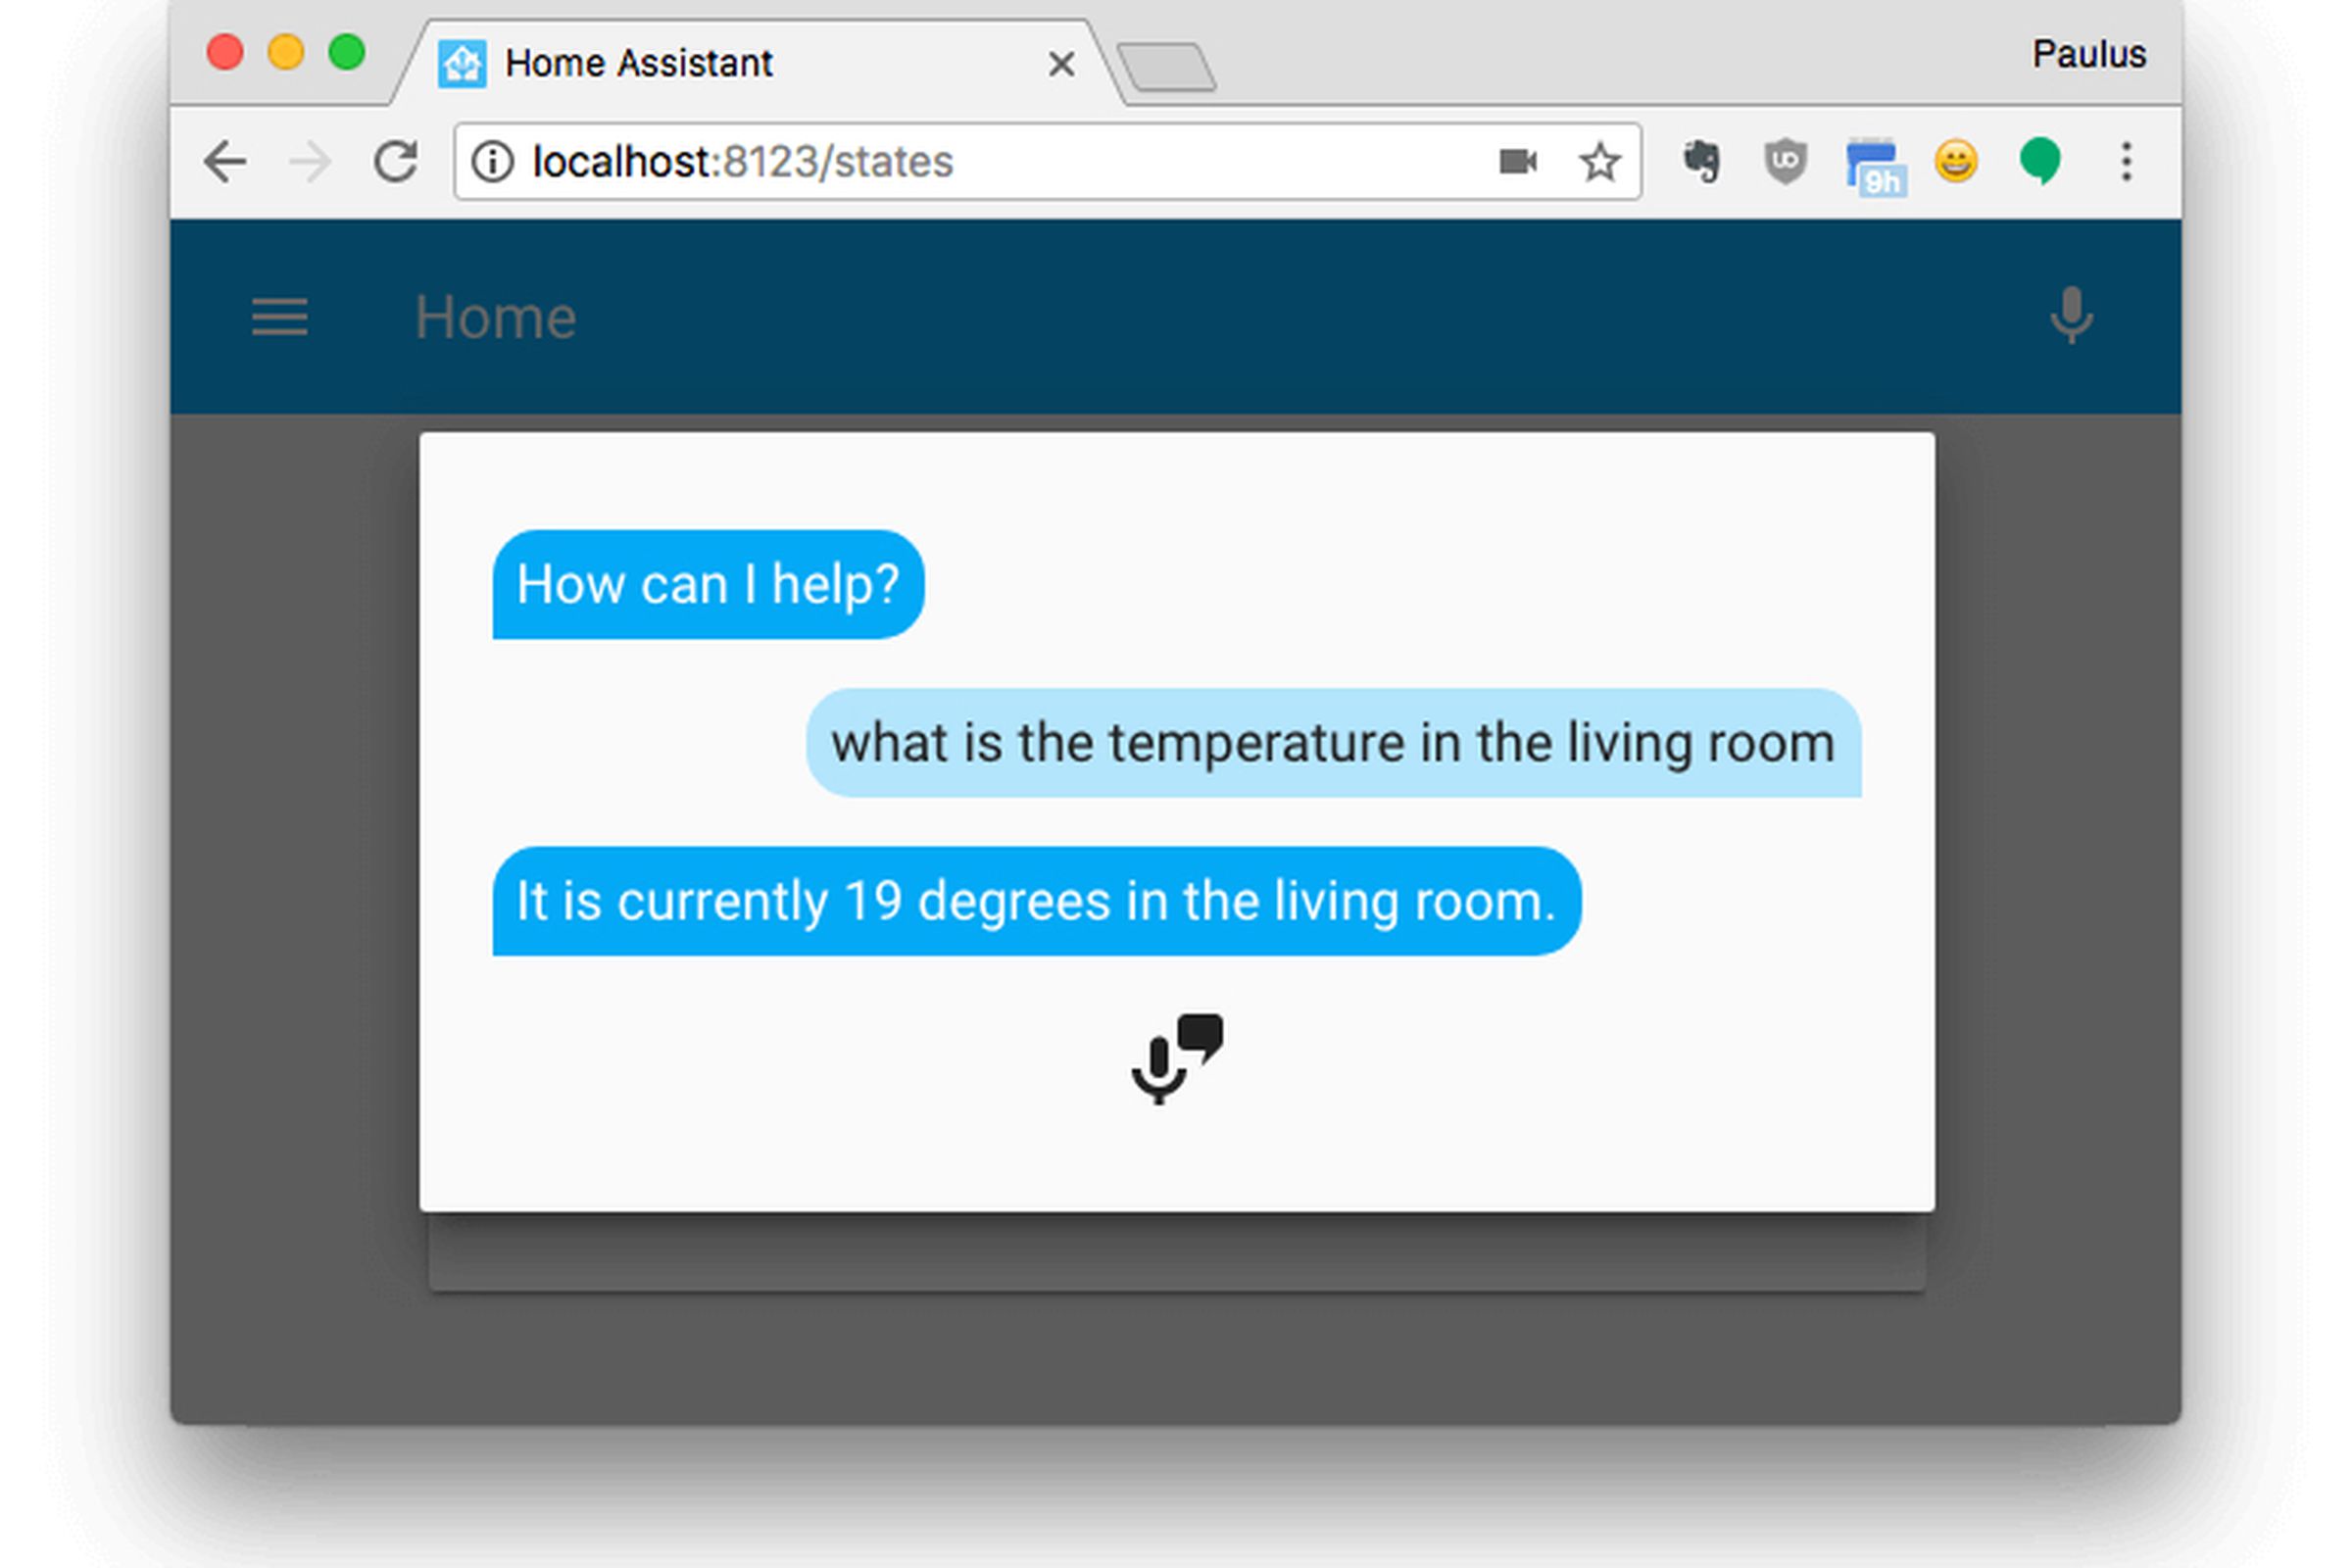 The home assistant application is running in a browser window, and a microphone icon is at the bottom of a smartphone style text message conversation between a bot and a user asking what temperature it is in the living room.